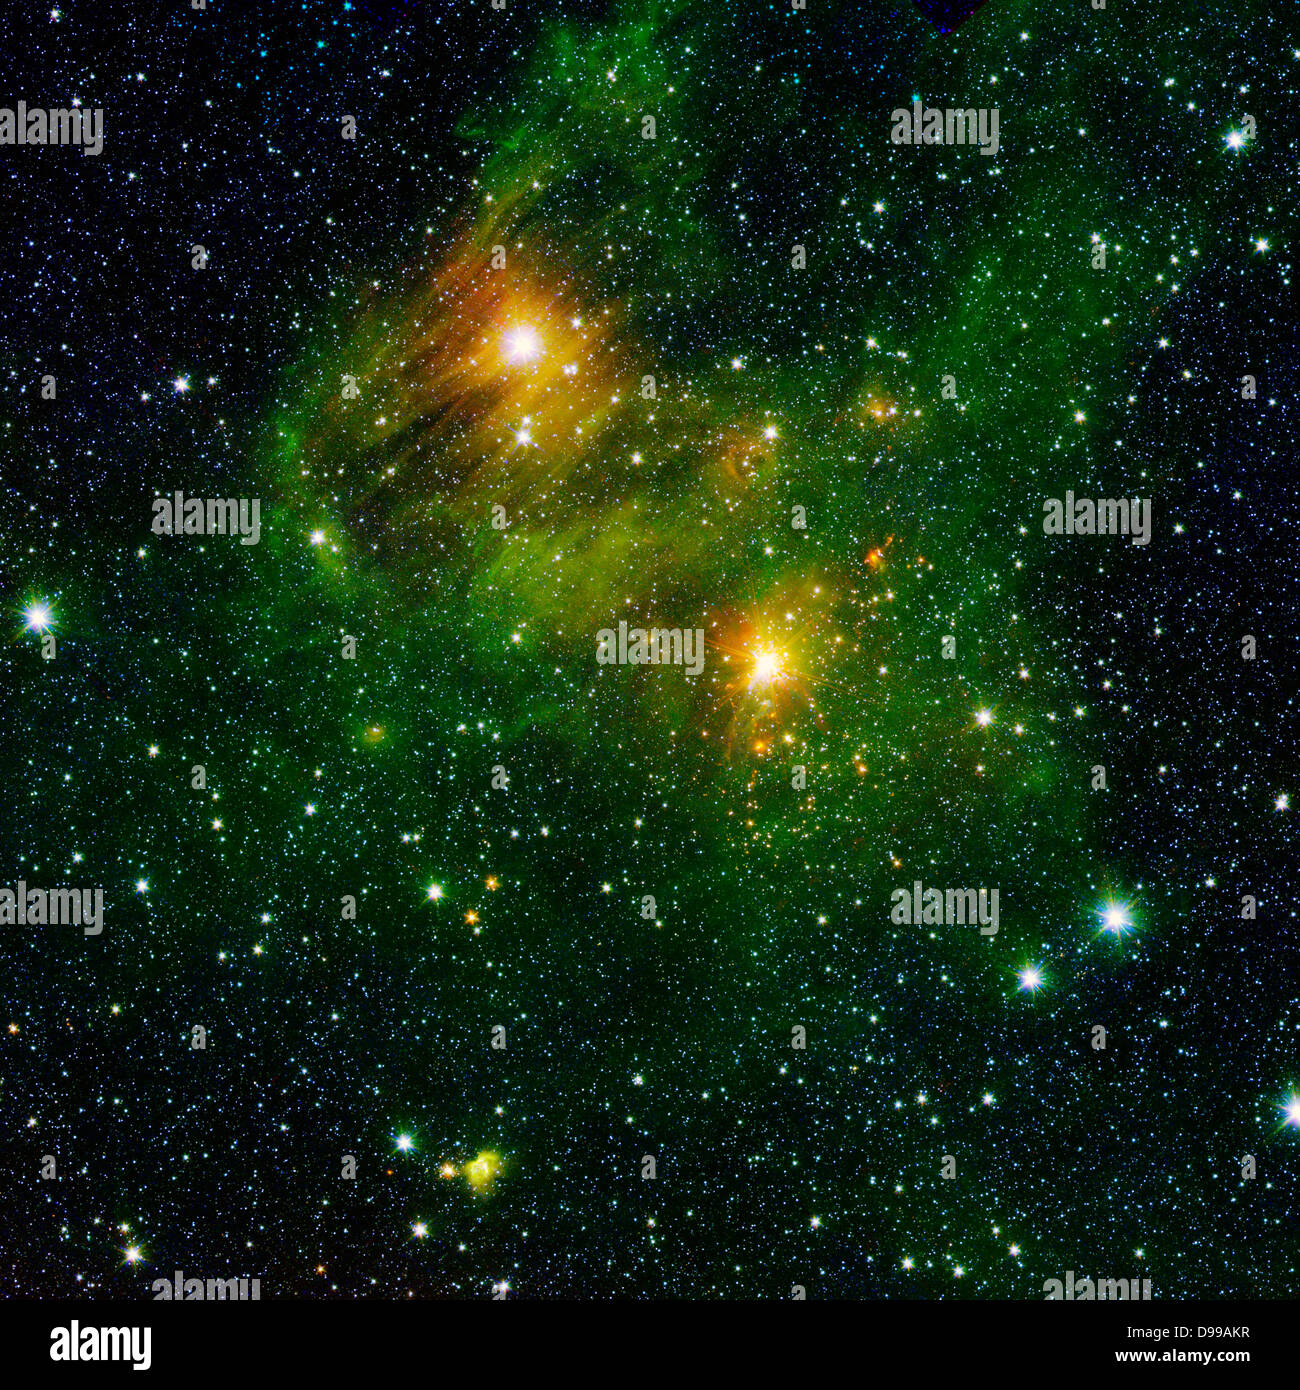 Two extremely bright stars illuminate a greenish mist in this and image from the new 'GLIMPSE360' survey from NASA's Spitzer Space Telescope. Stock Photo